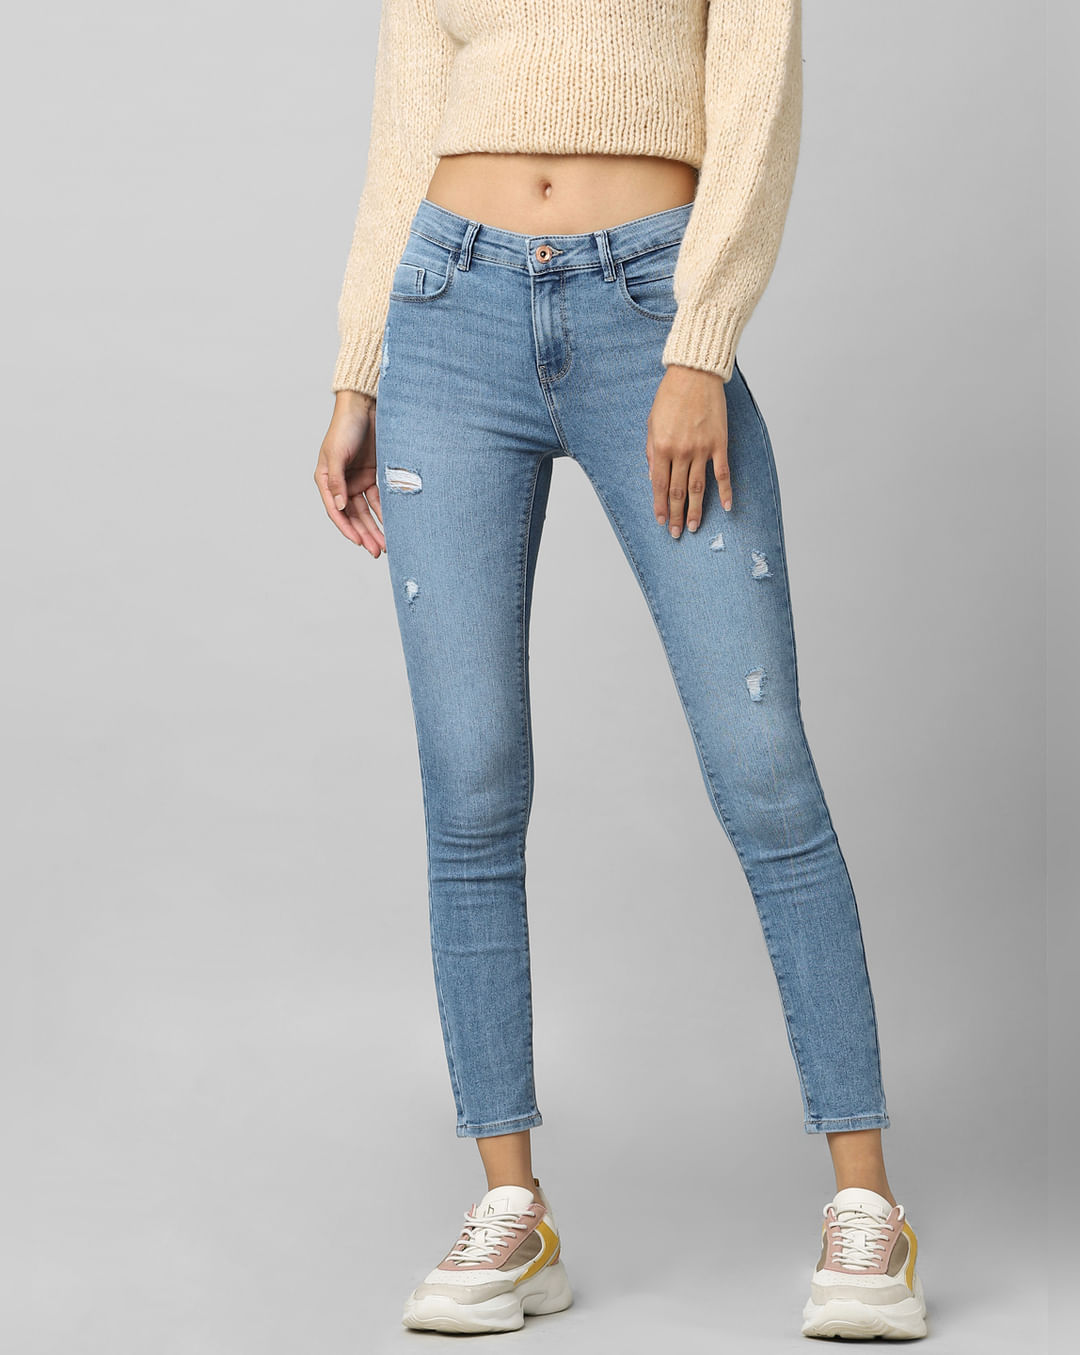 Buy Blue Mid Rise Pushup Distressed Skinny Jeans For Women - ONLY